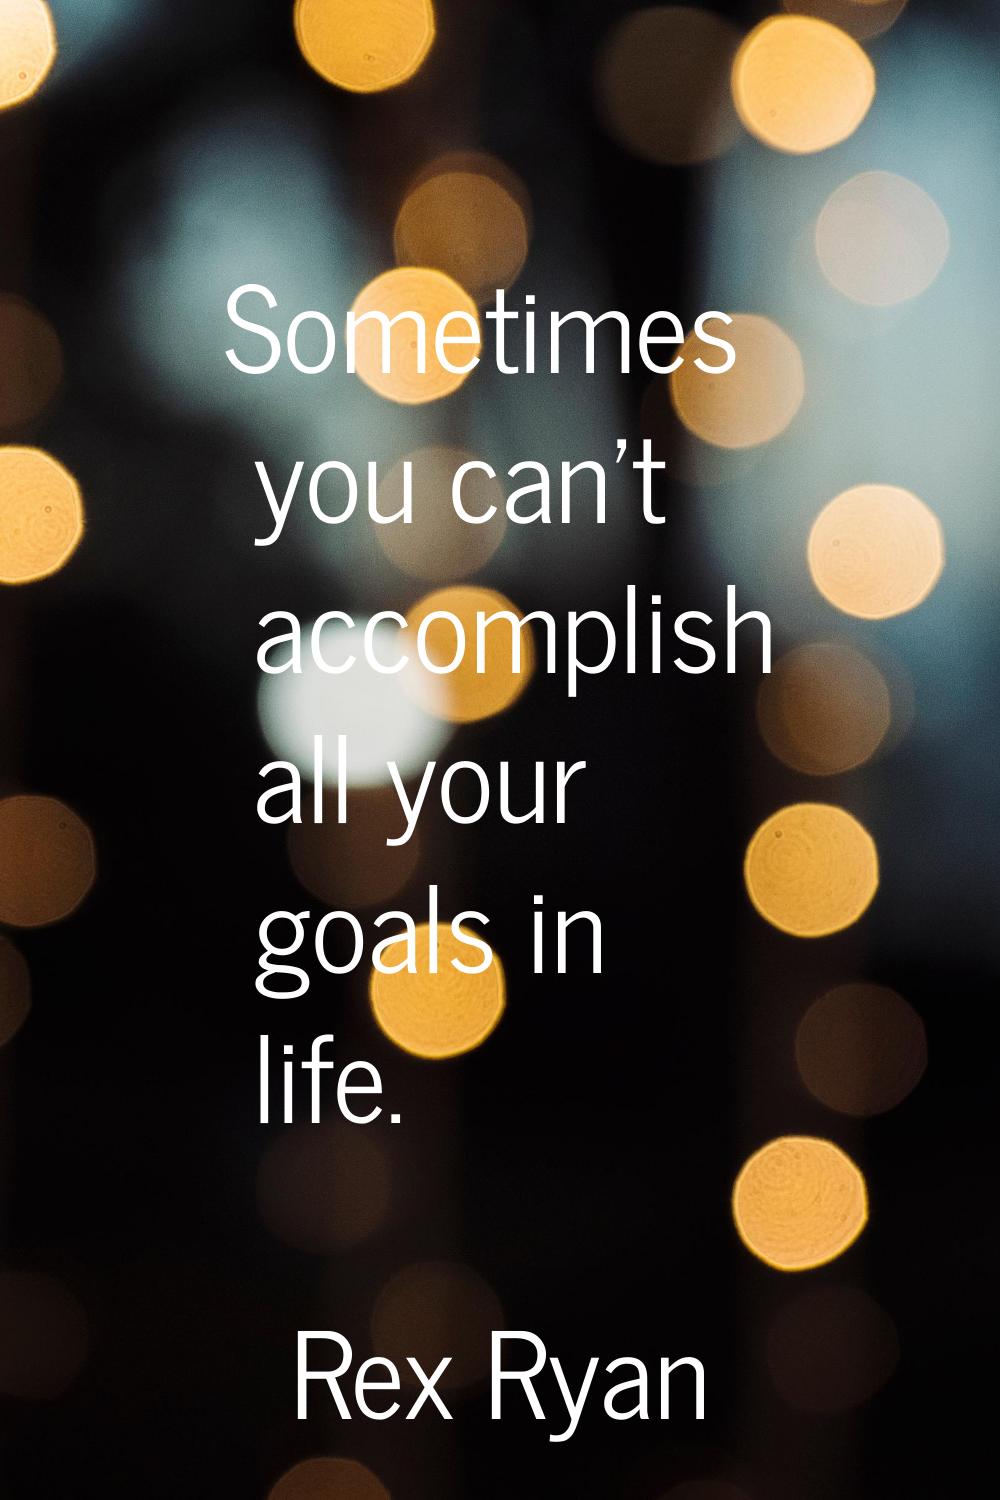 Sometimes you can't accomplish all your goals in life.